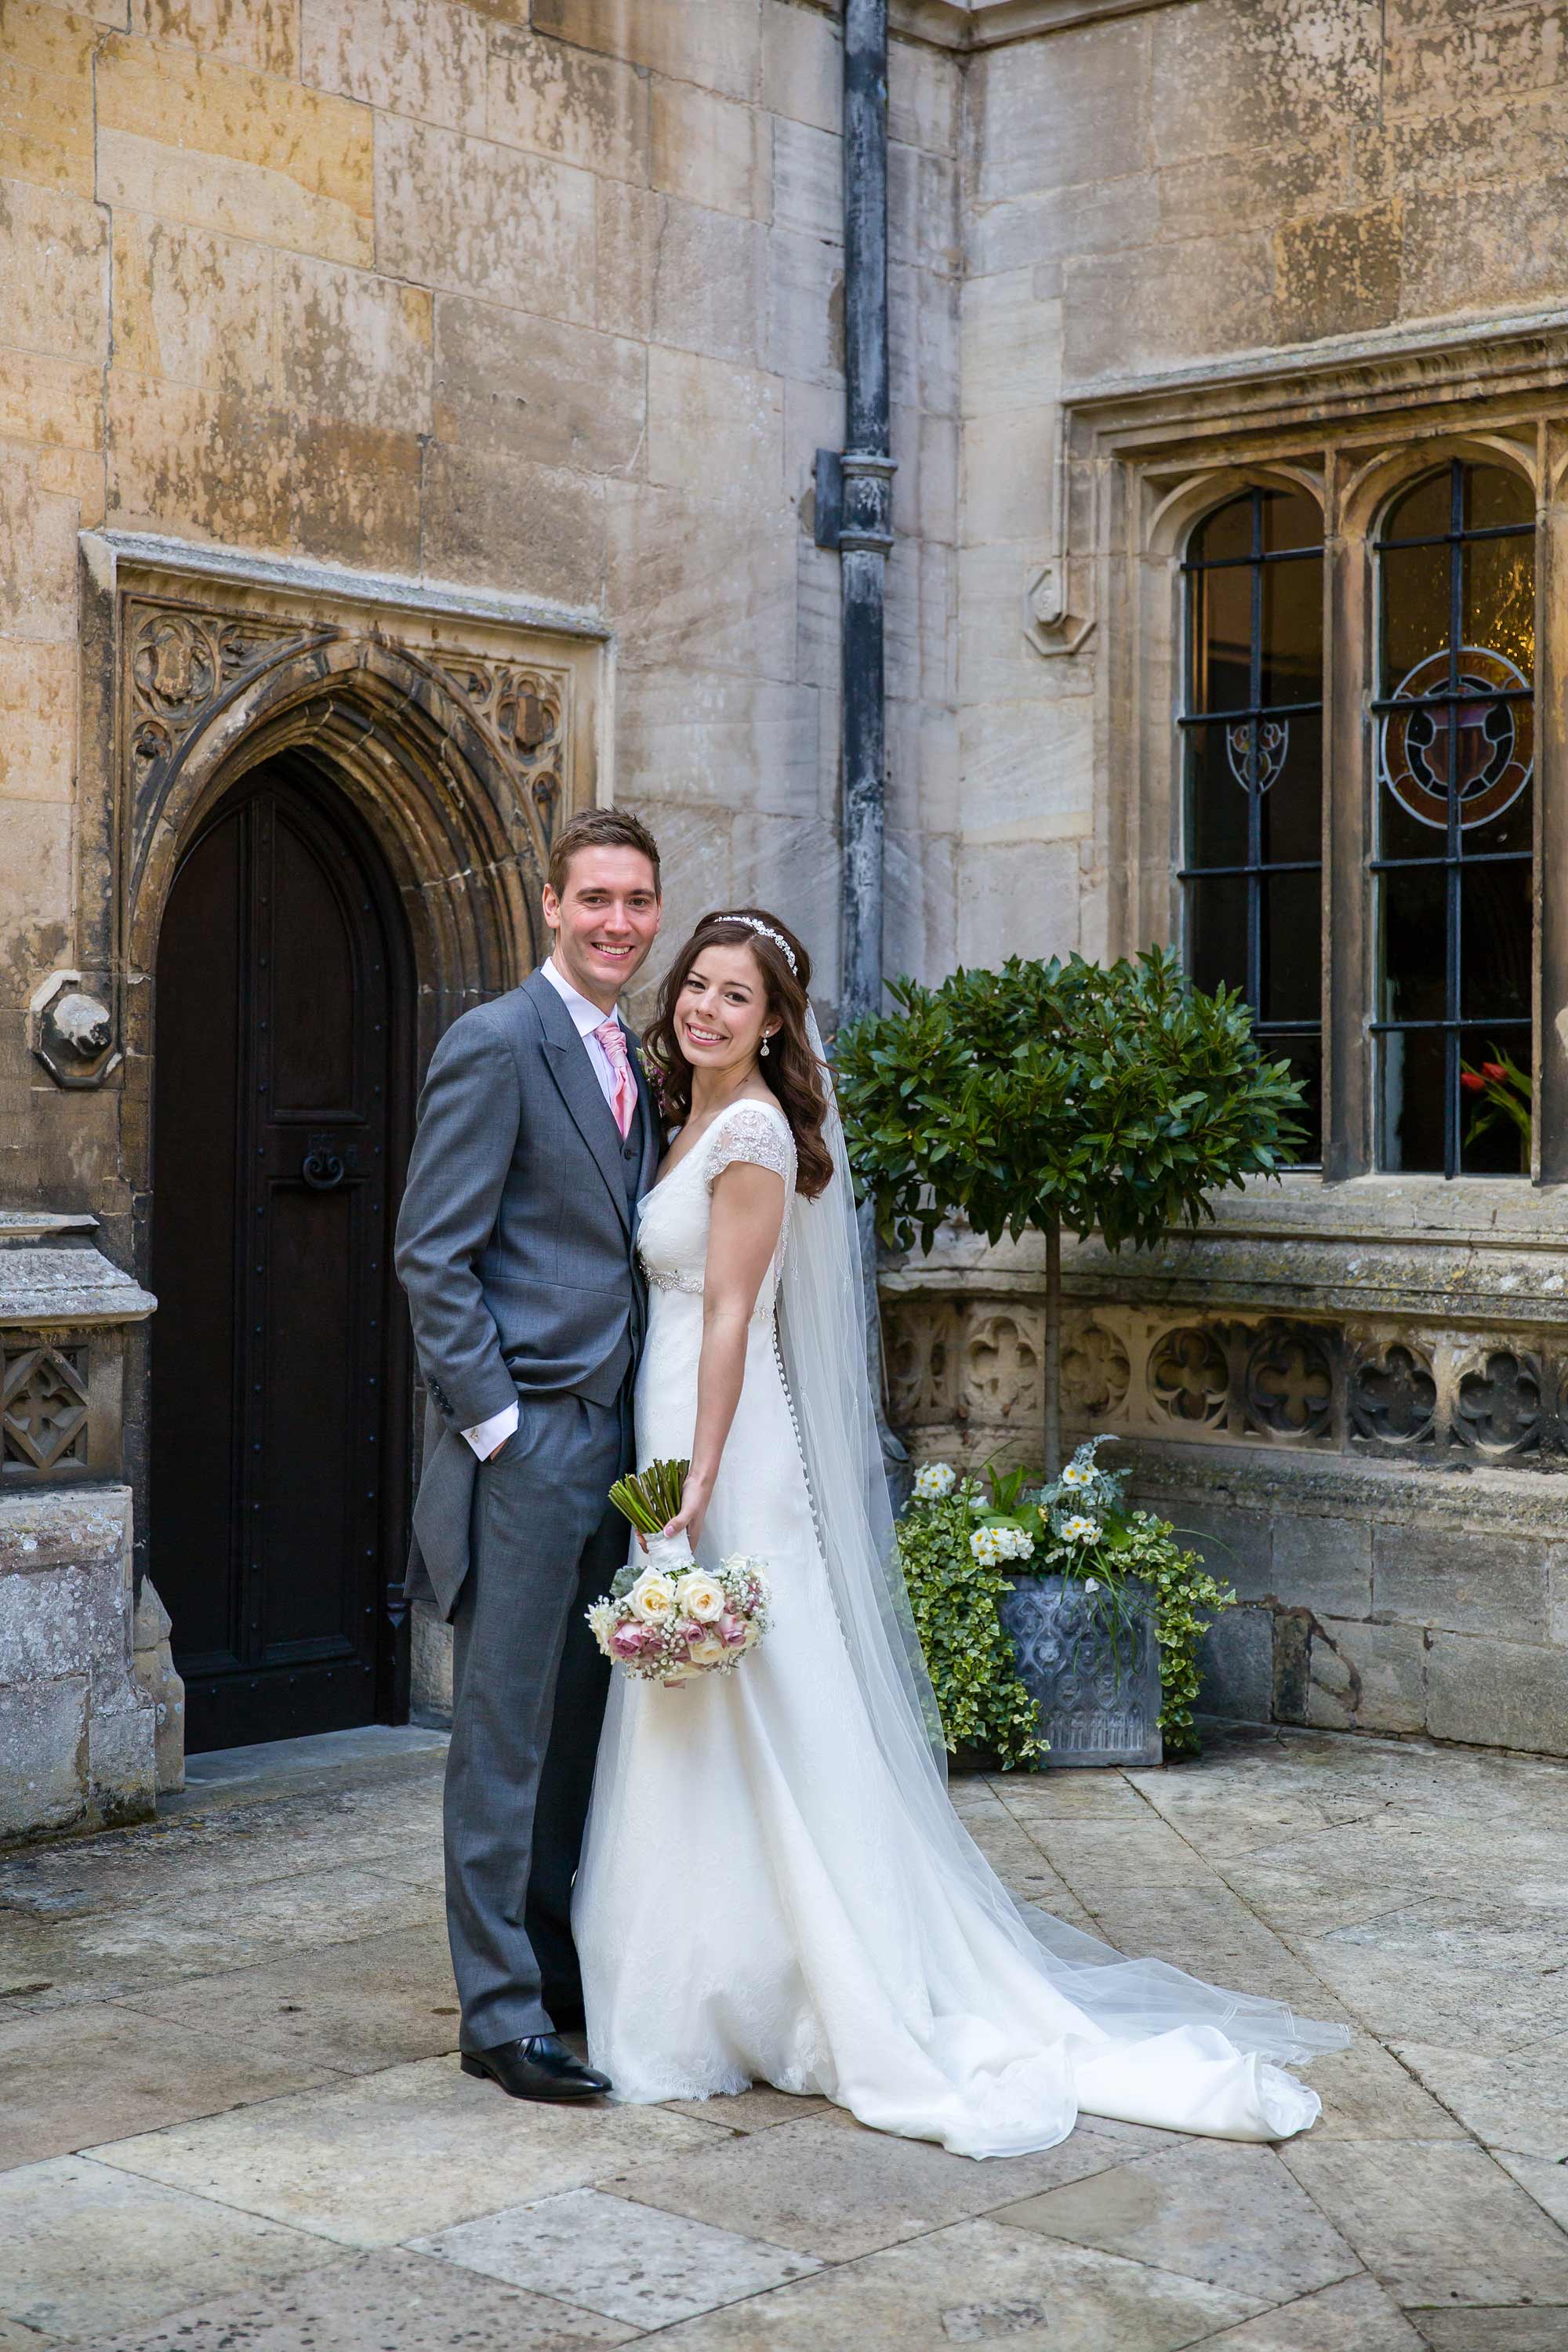 A full length portrait of Amy and Jack in the courtyard of Hengrave Hall.